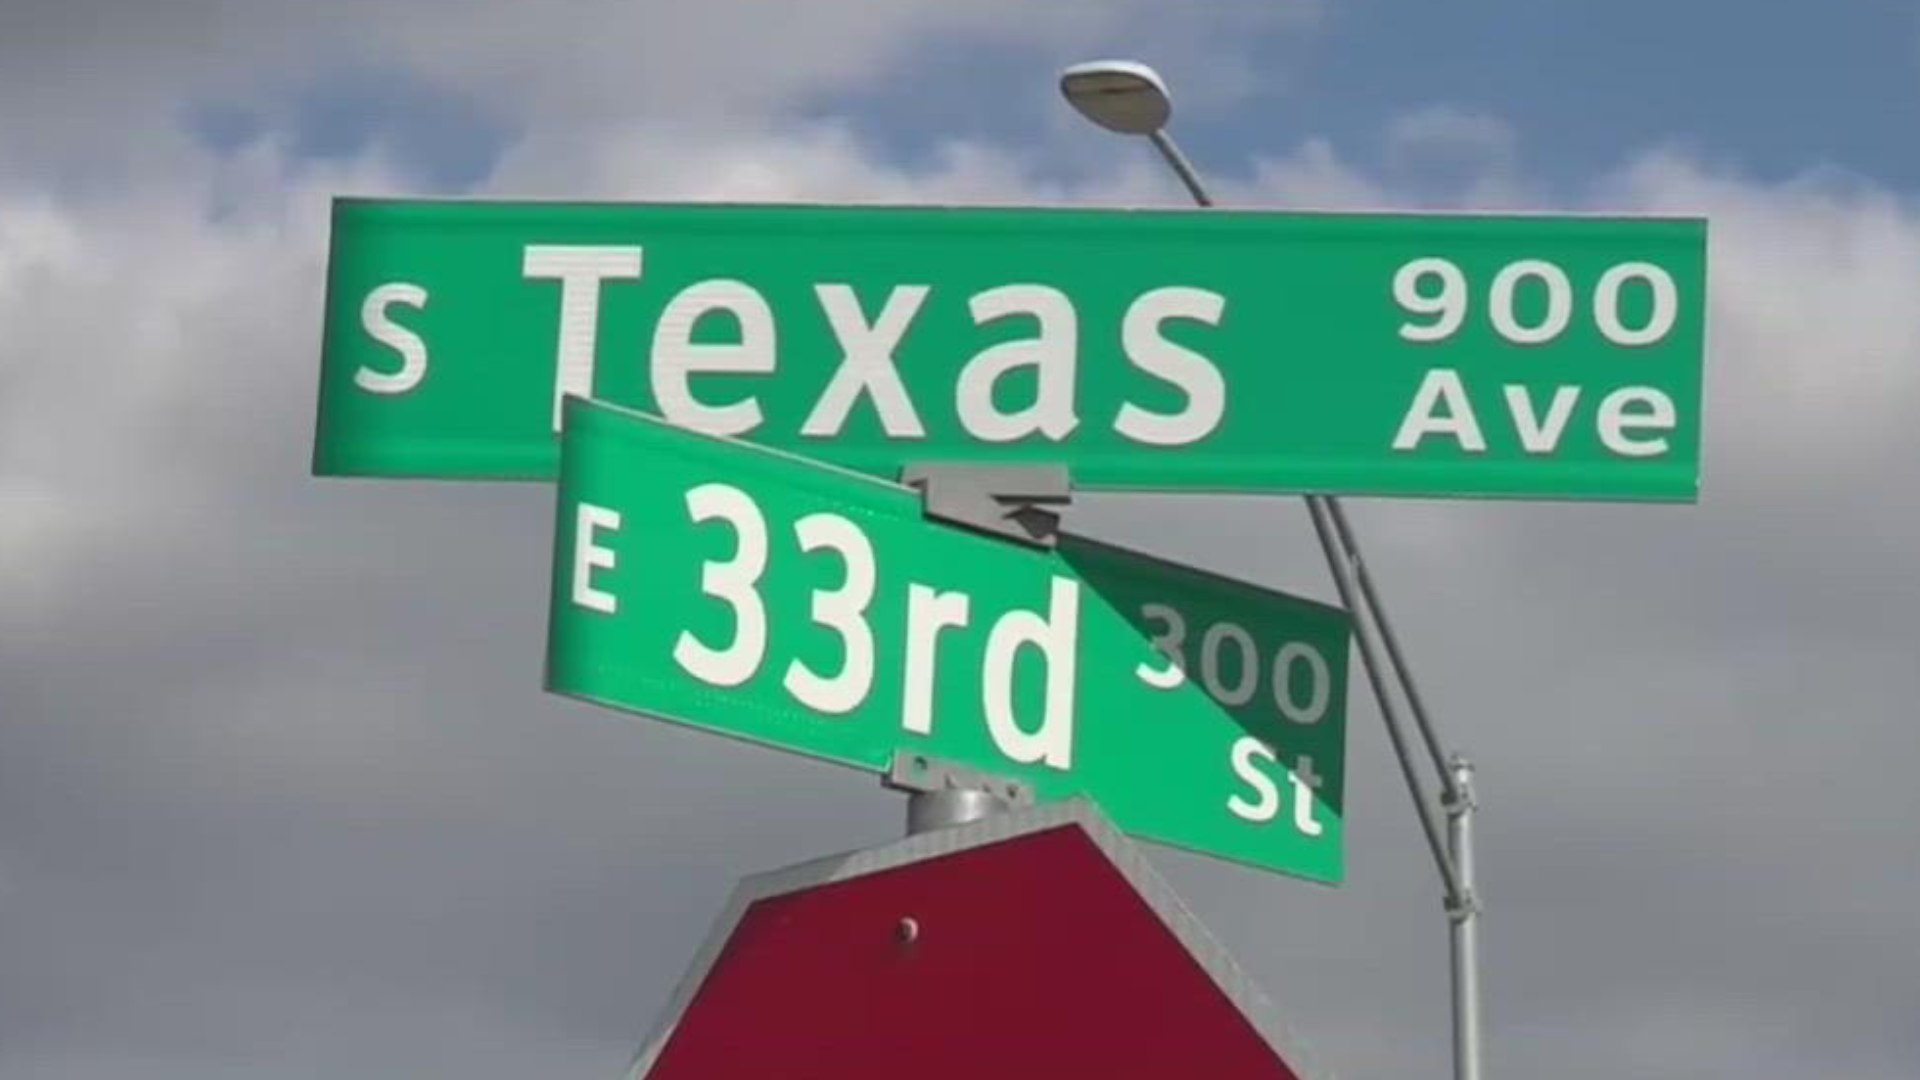 The project is expected to be completed this summer, according to a release from TxDOT.